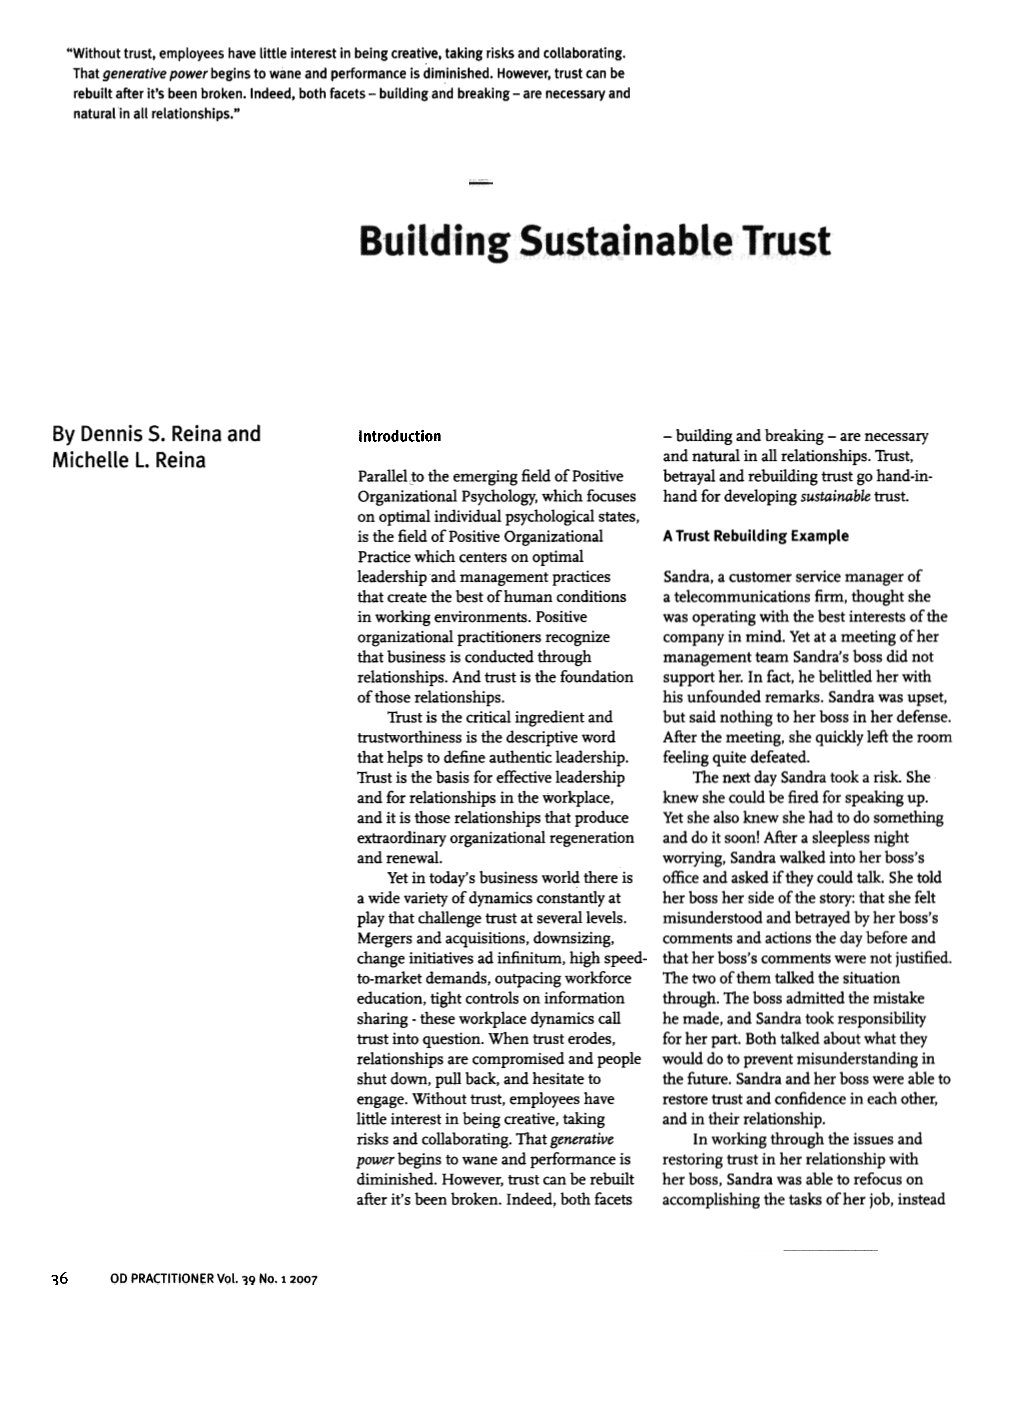 ODN-Building-Sustainable-Trust-Wout